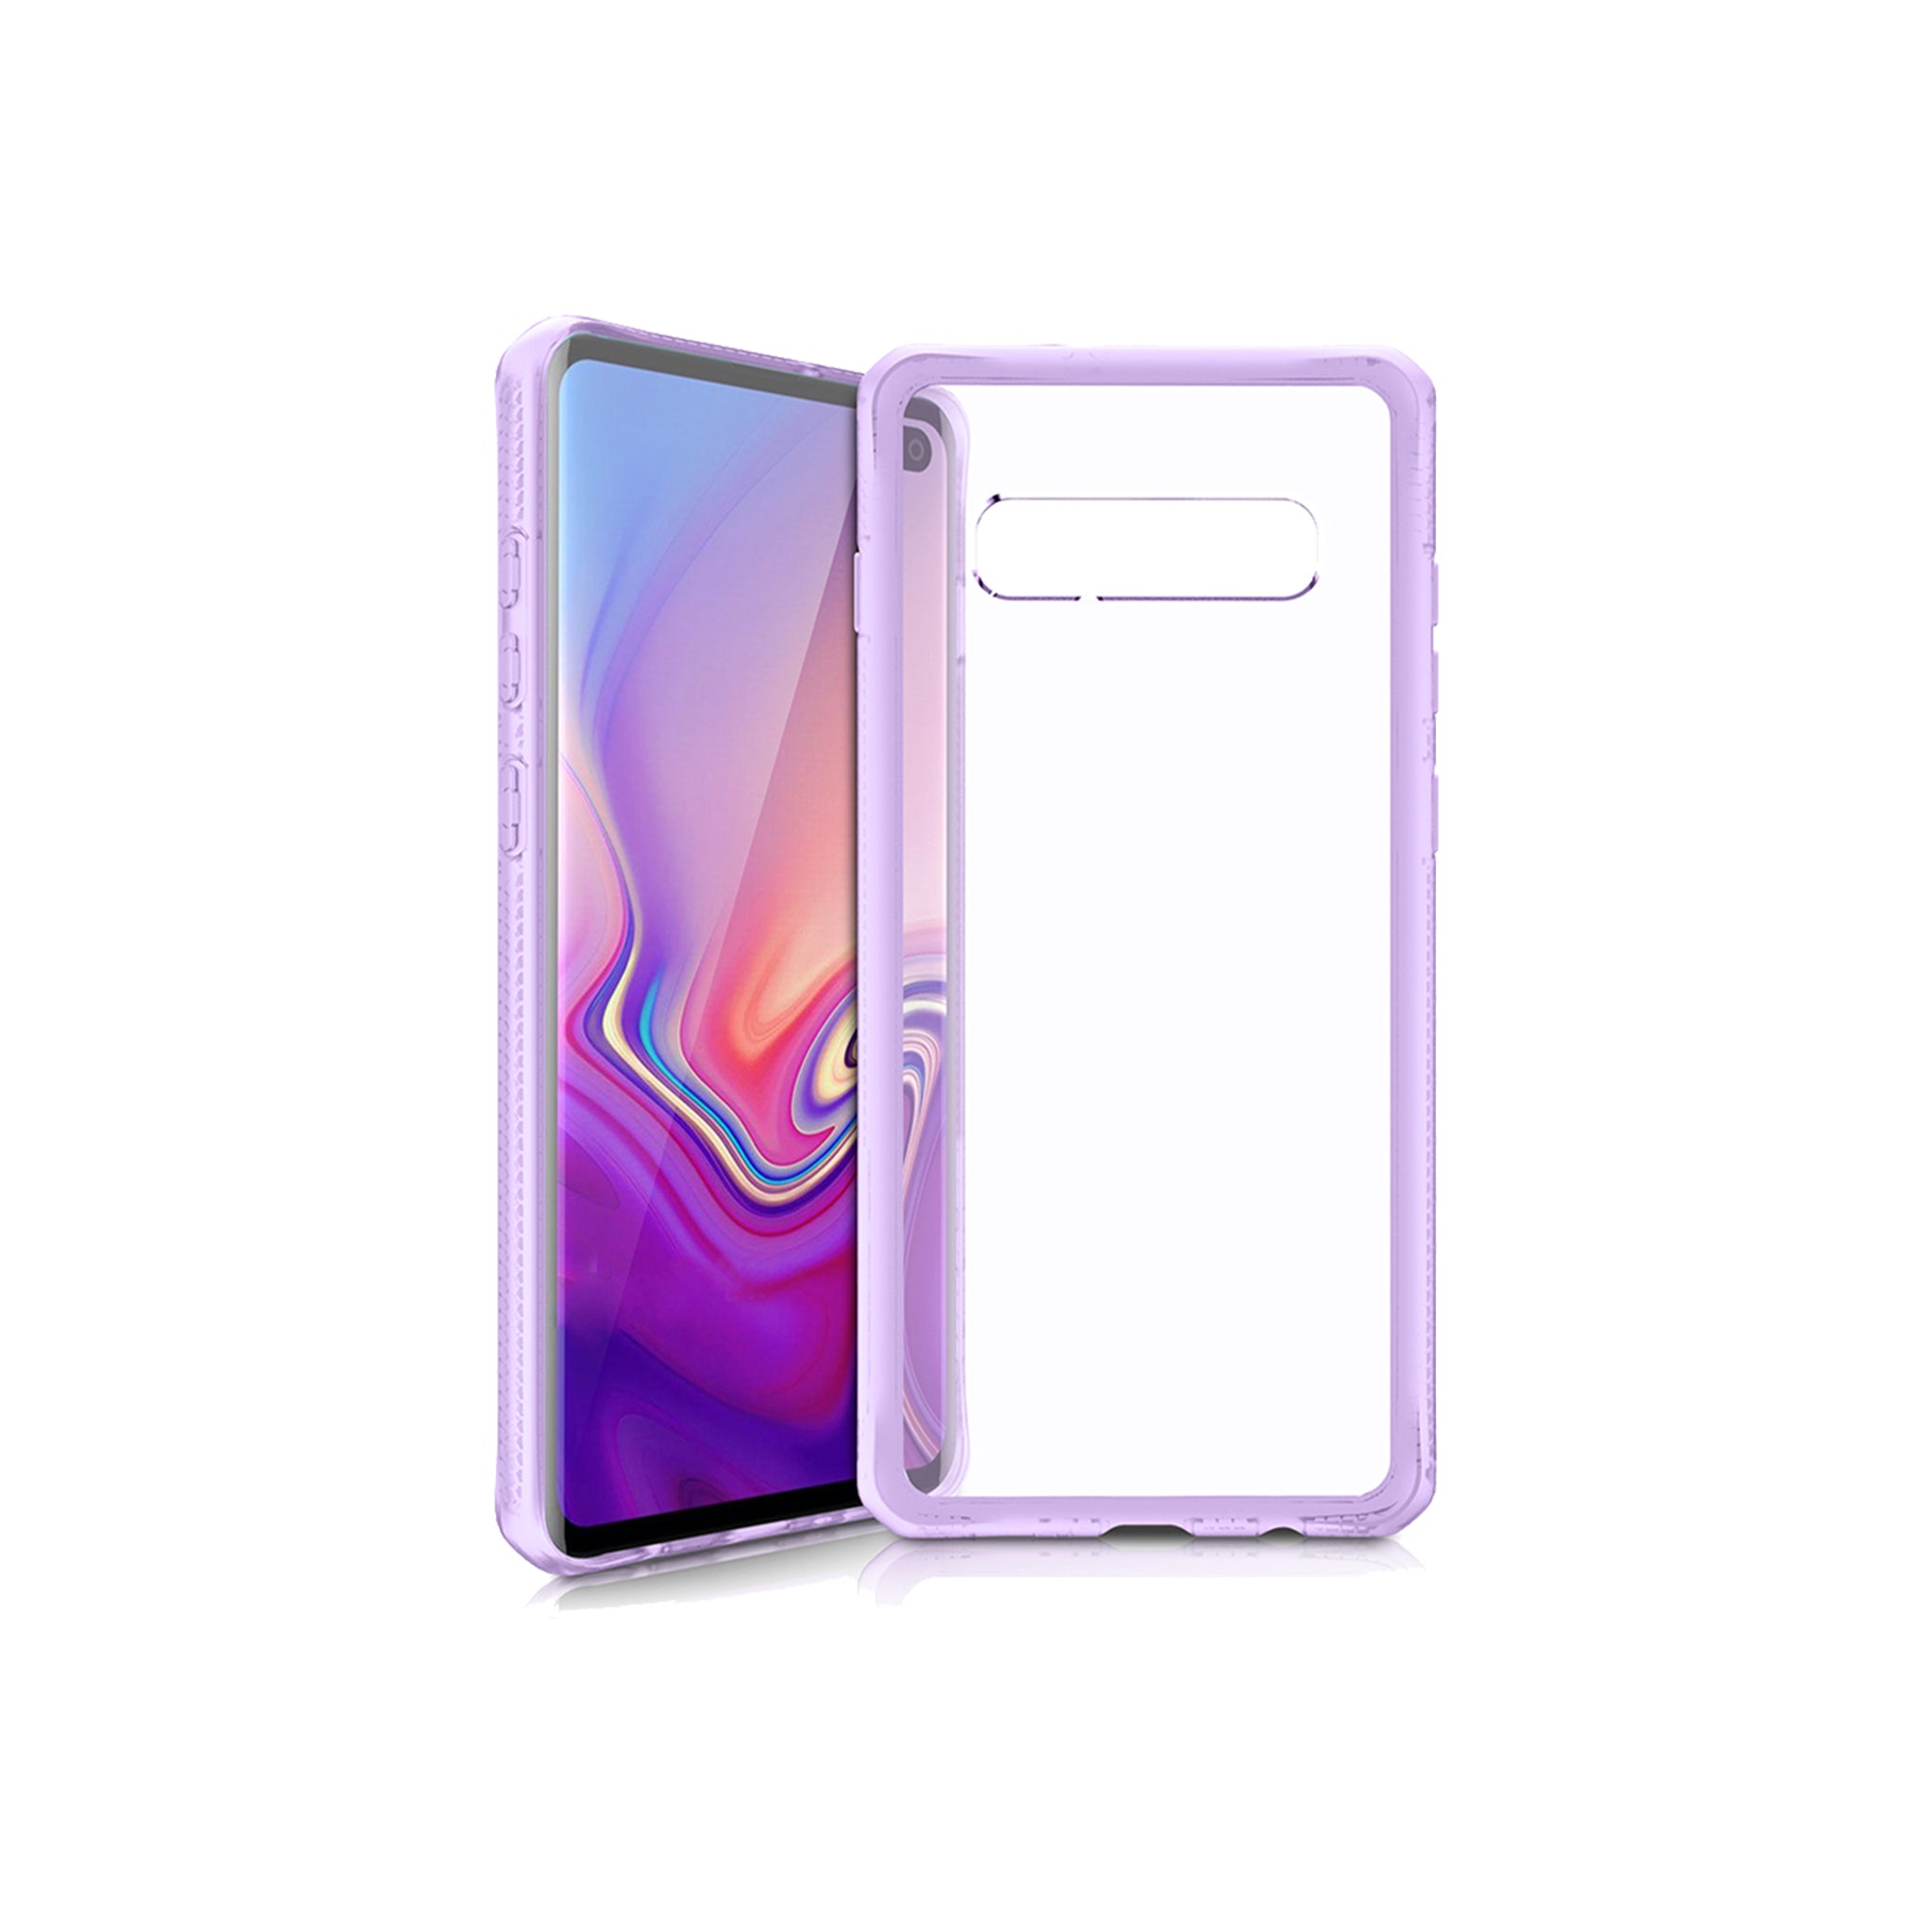 Itskins - Hybrid Frost Mkii Case For Samsung Galaxy S10 Plus - Light Purple And Transparent